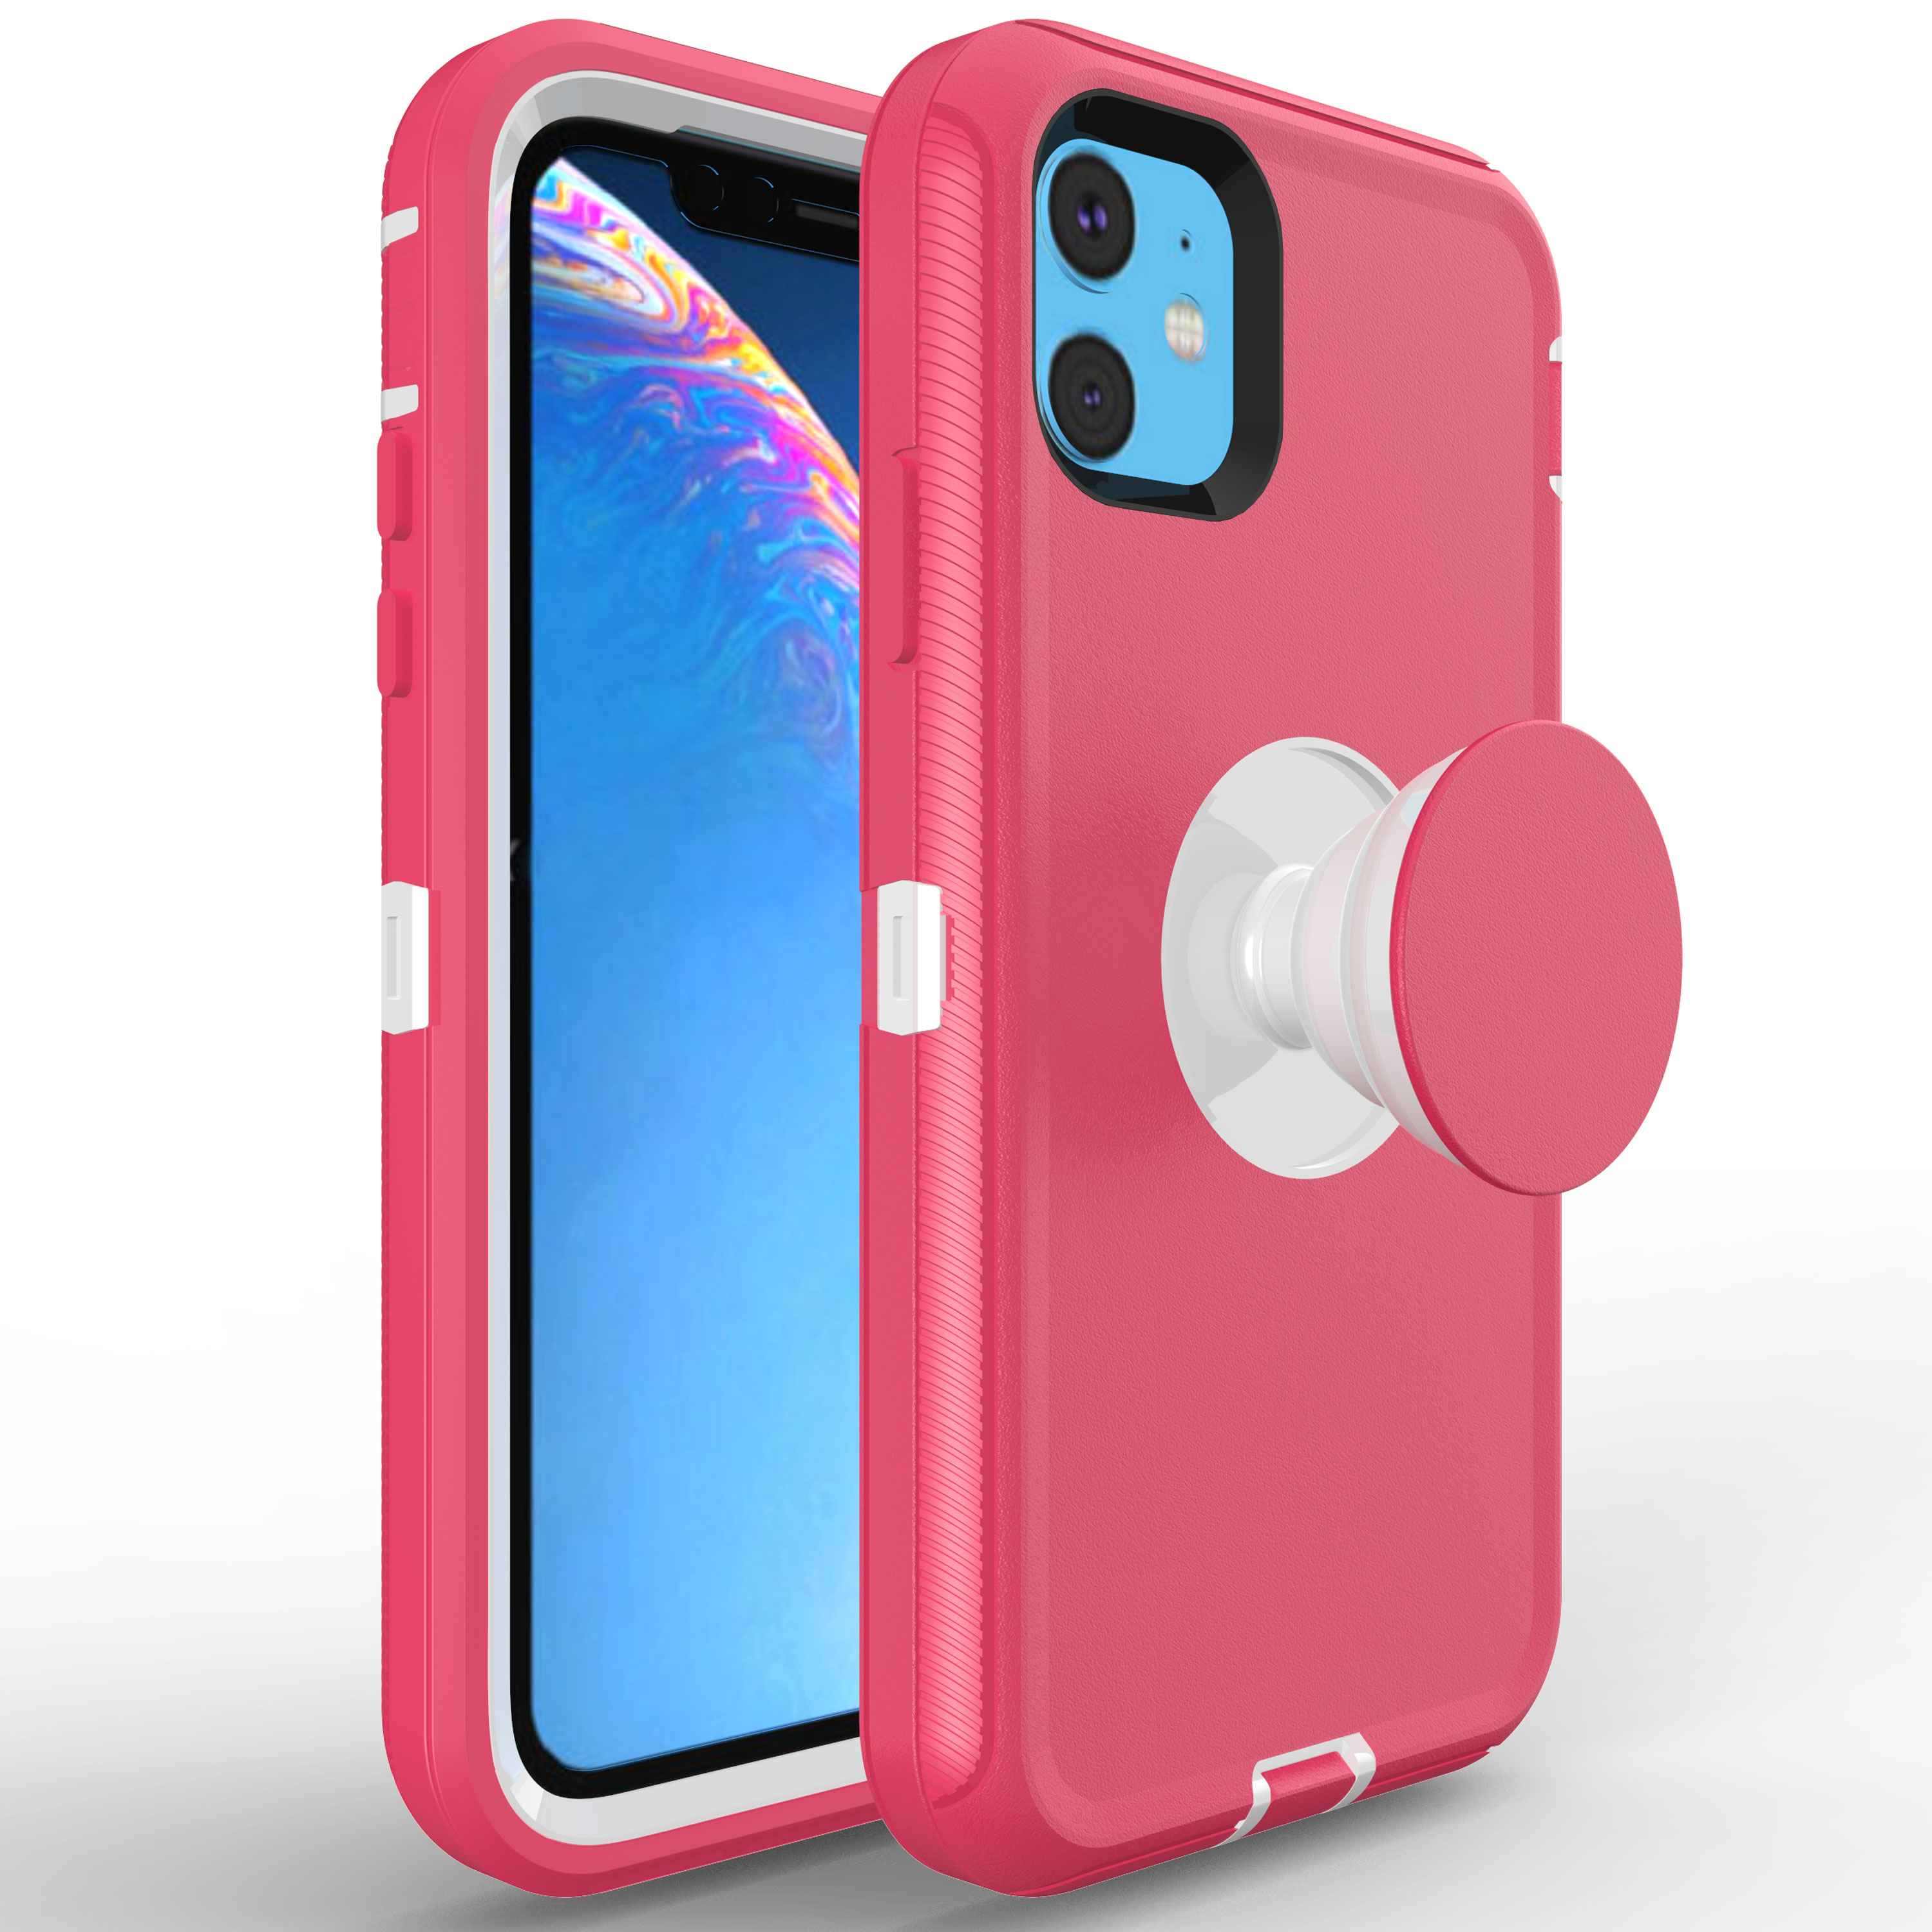 iPHONE 11 Pro (5.8in) Pop Up Grip Armor Robot Case (Hot Pink White)